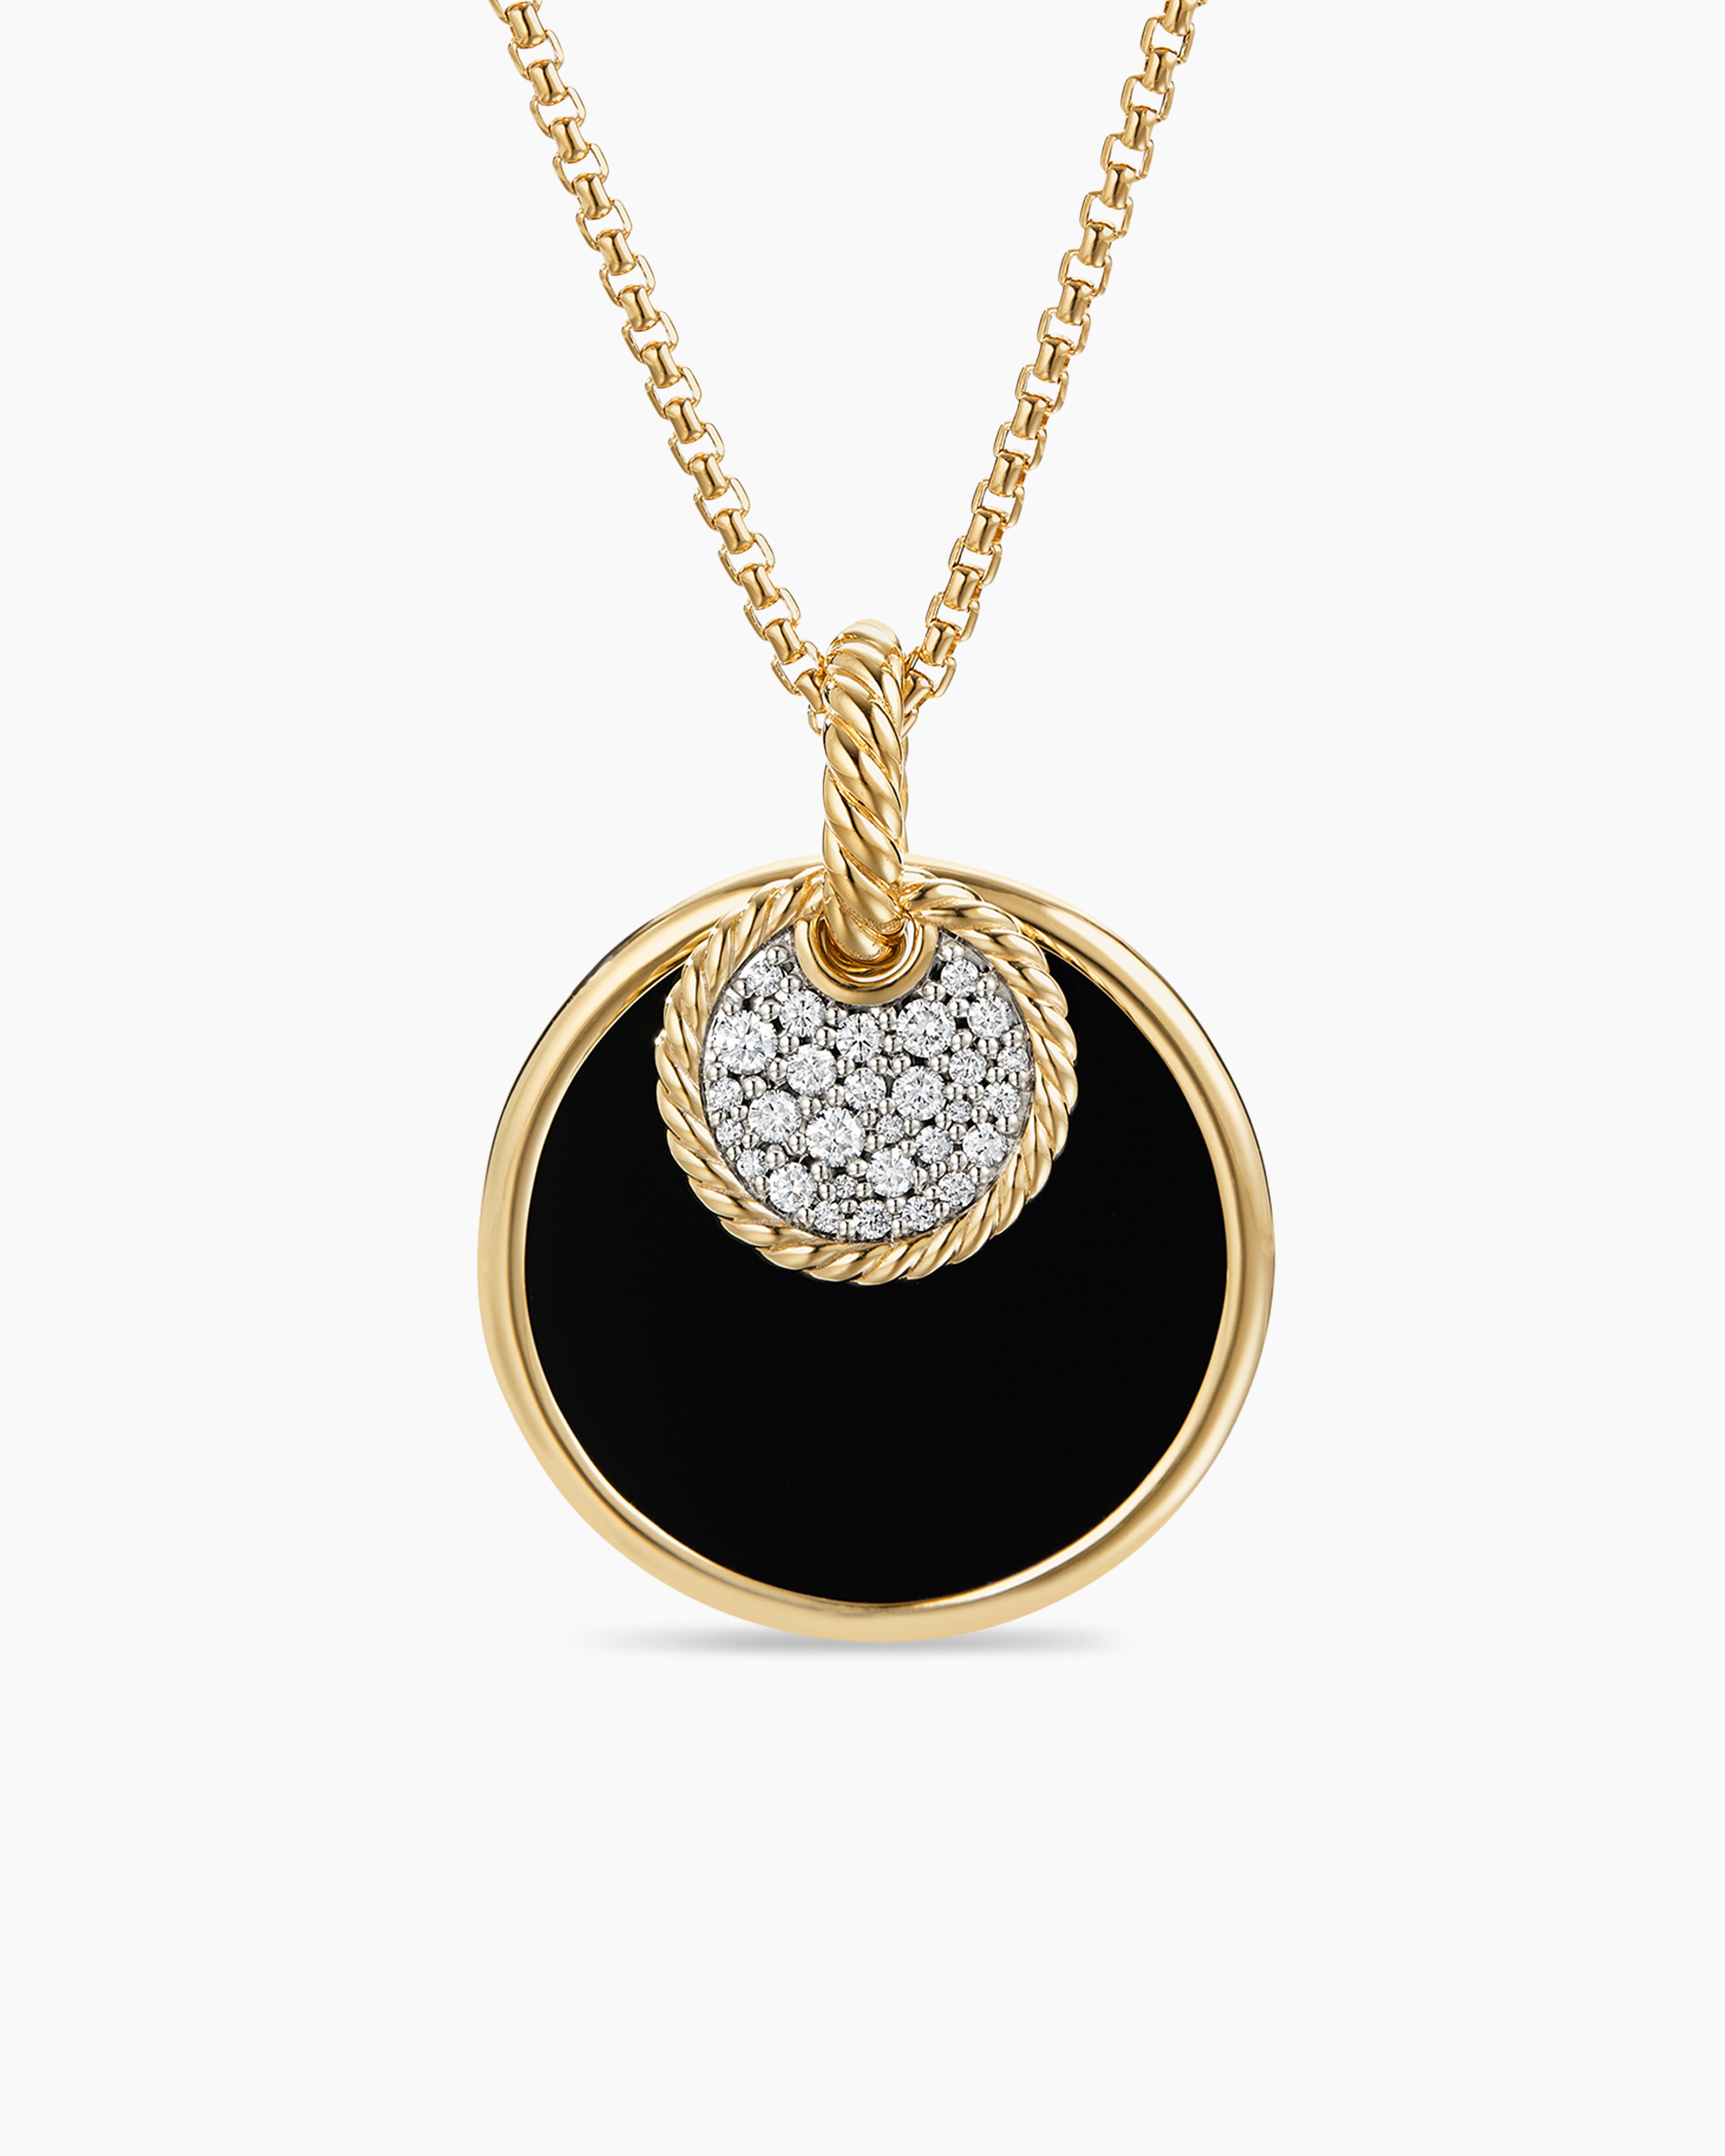 DY Elements Convertible Pendant Necklace in 18K Yellow Gold with Black Onyx  and Mother of Pearl and Pav� Diamonds – Bailey's Fine Jewelry